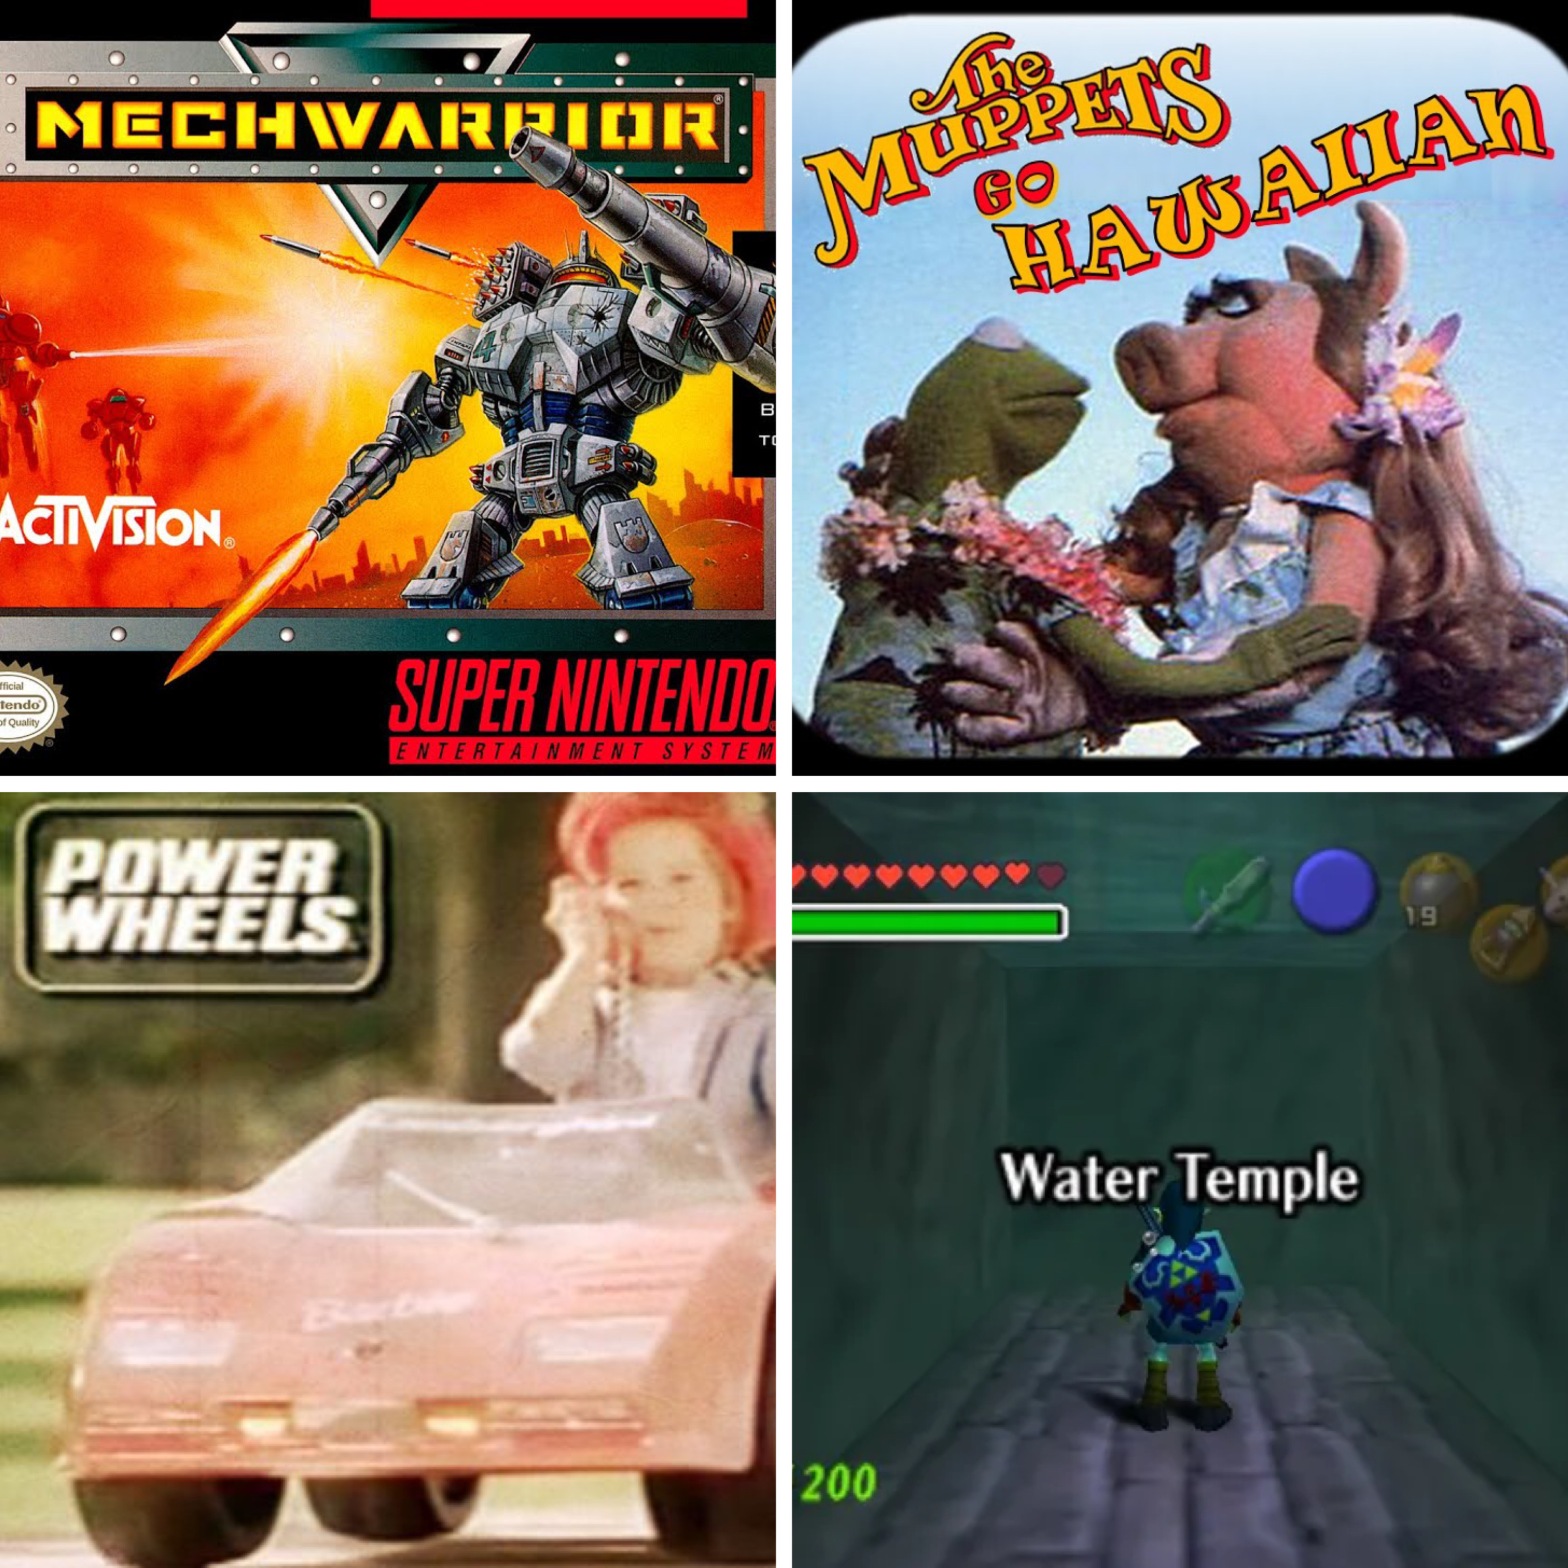 The cover of MechWarrior on SNES, The Muppets Go Hawaiian, a Power Wheels ad, and the Water Temple from Ocarina of Time.